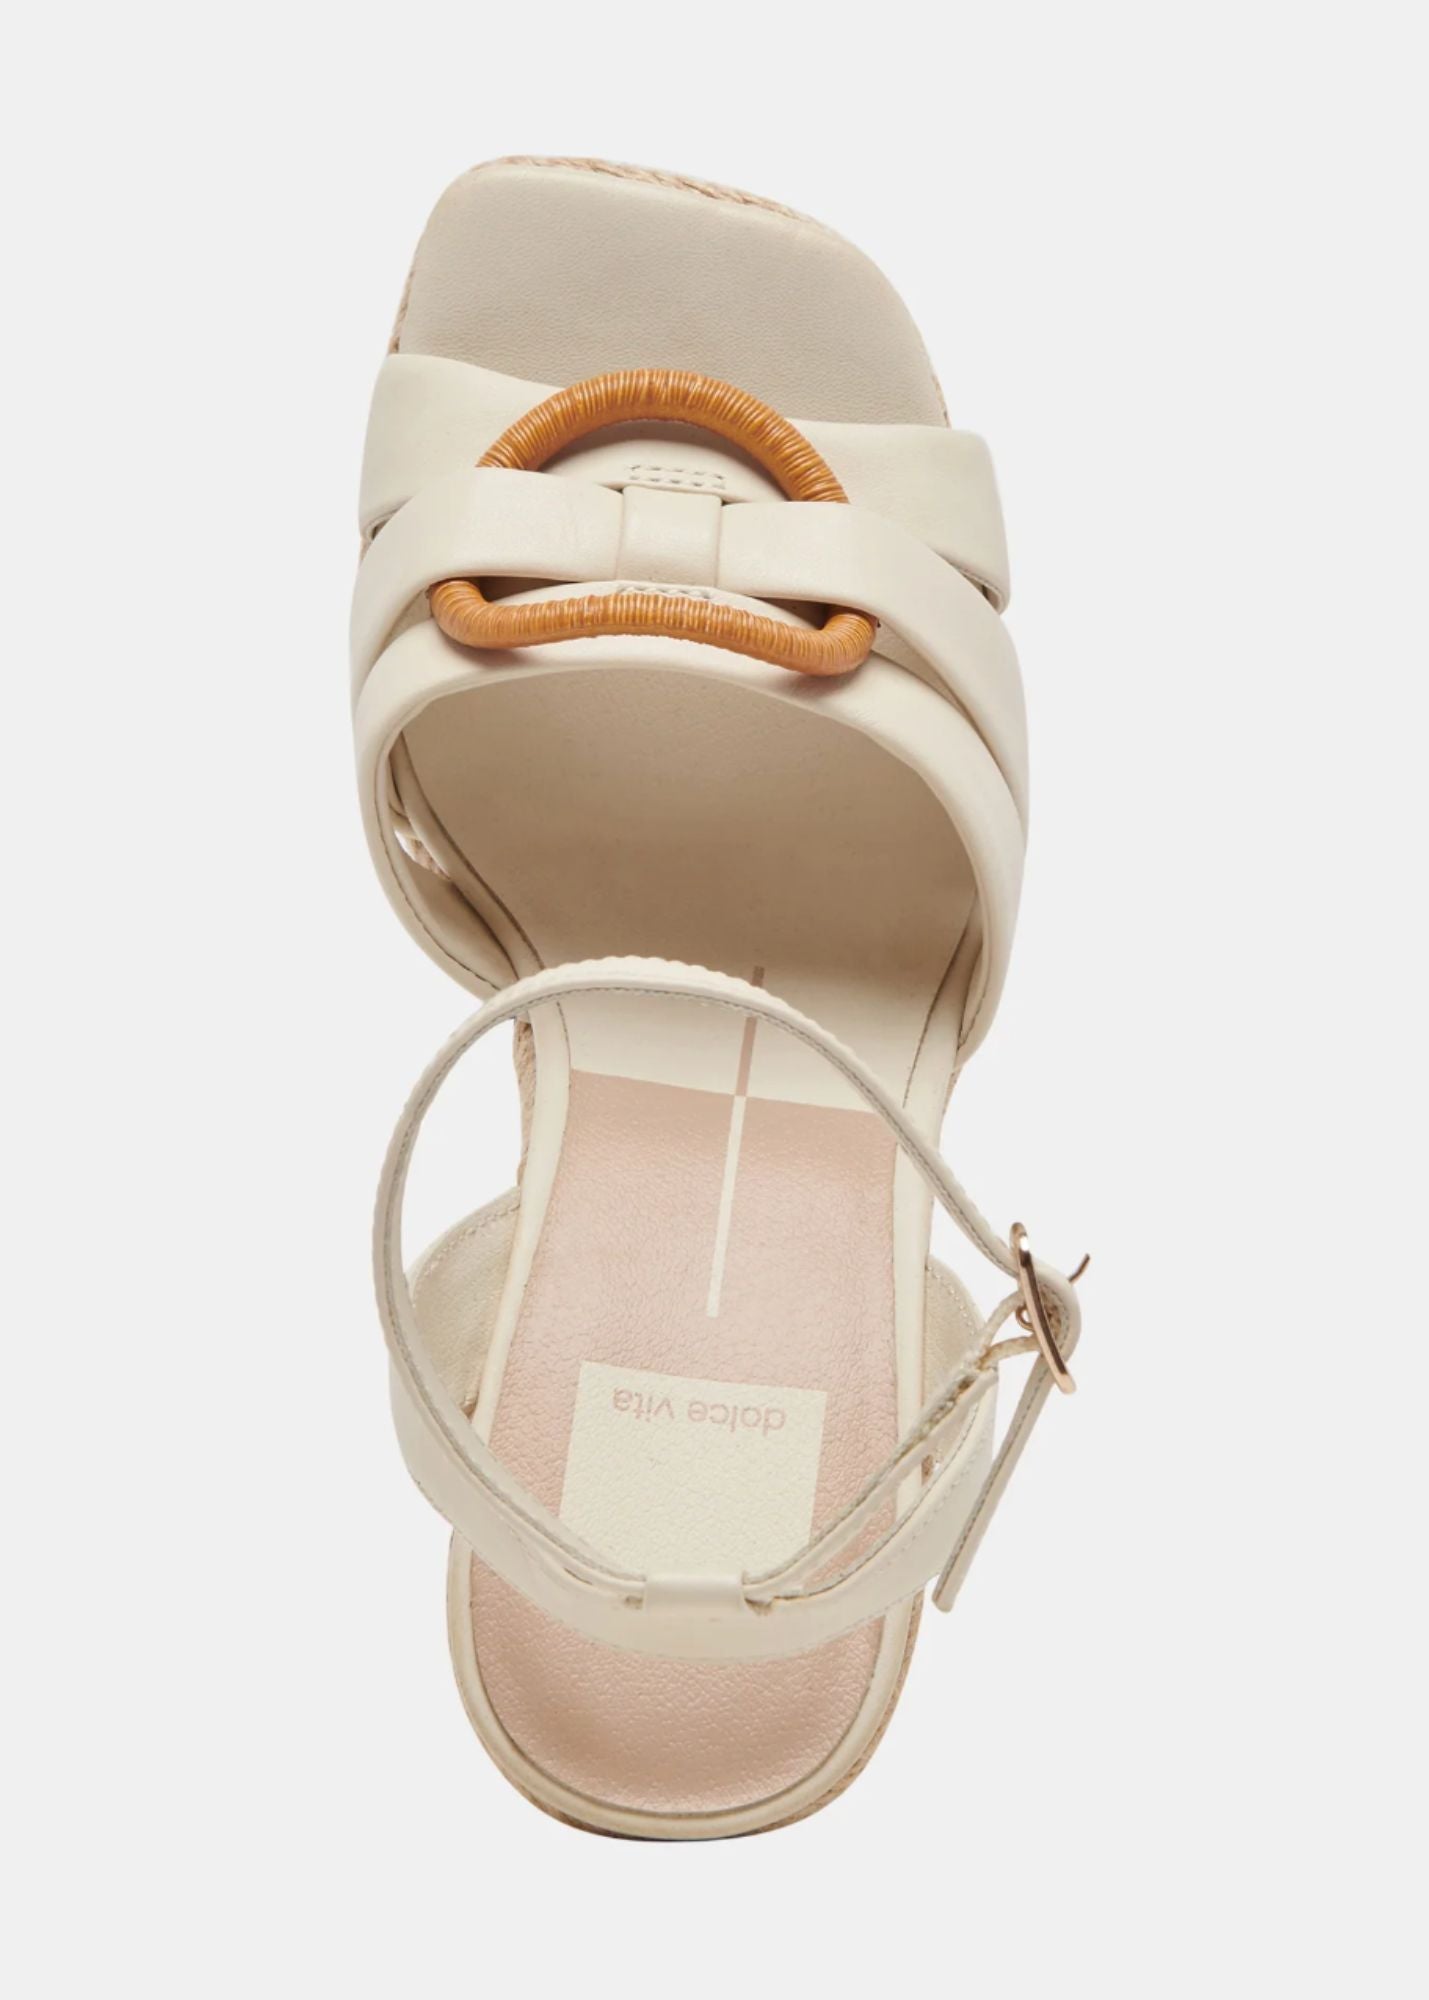 Maze Ivory Leather Wedge Sandals Shoes